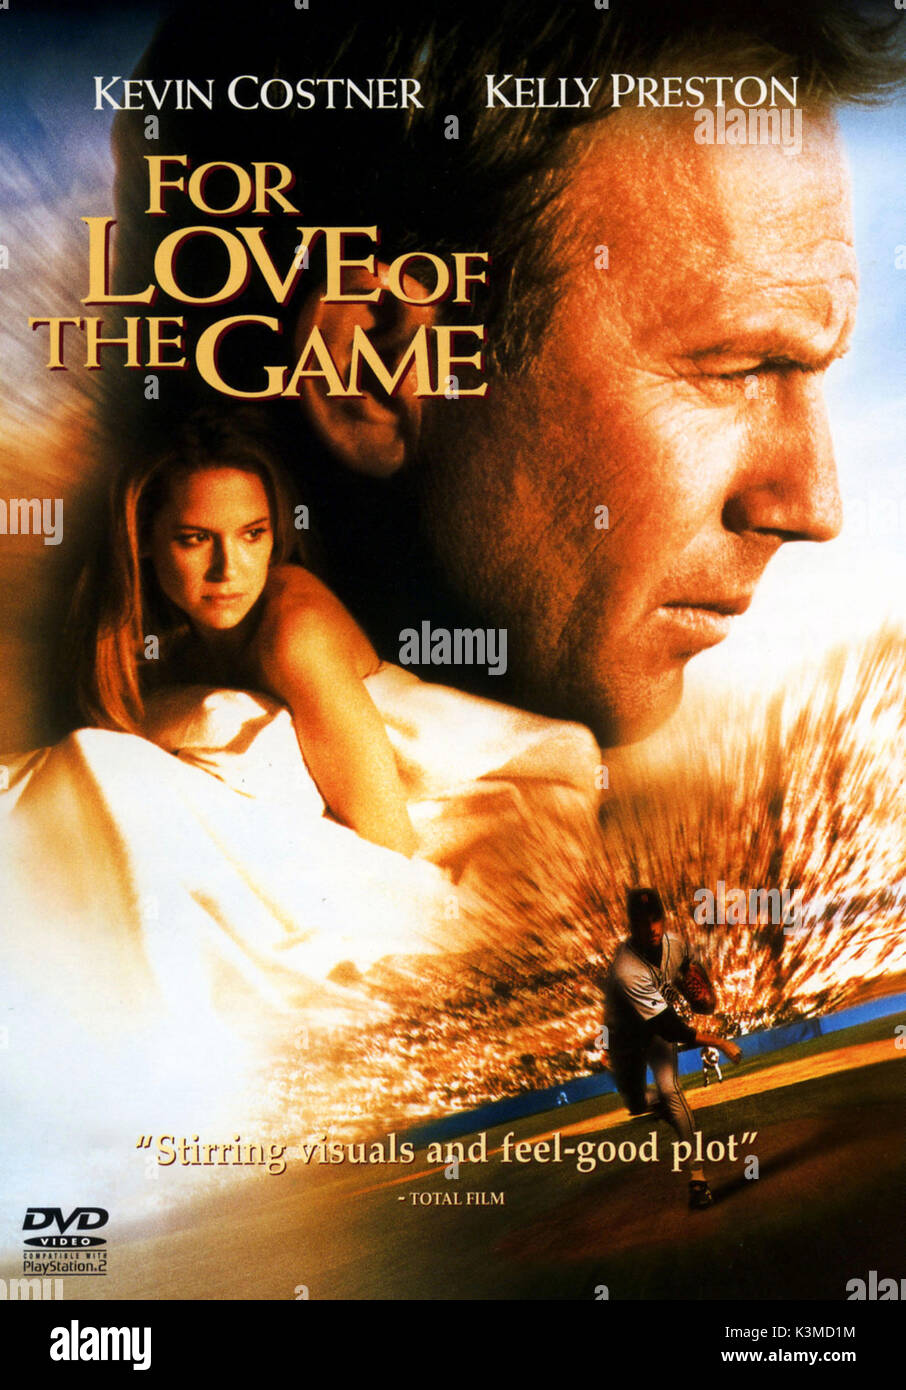 FOR LOVE OF THE GAME [US 1999] KELLY PRESTON, KEVIN COSTNER     Date: 1999 Stock Photo